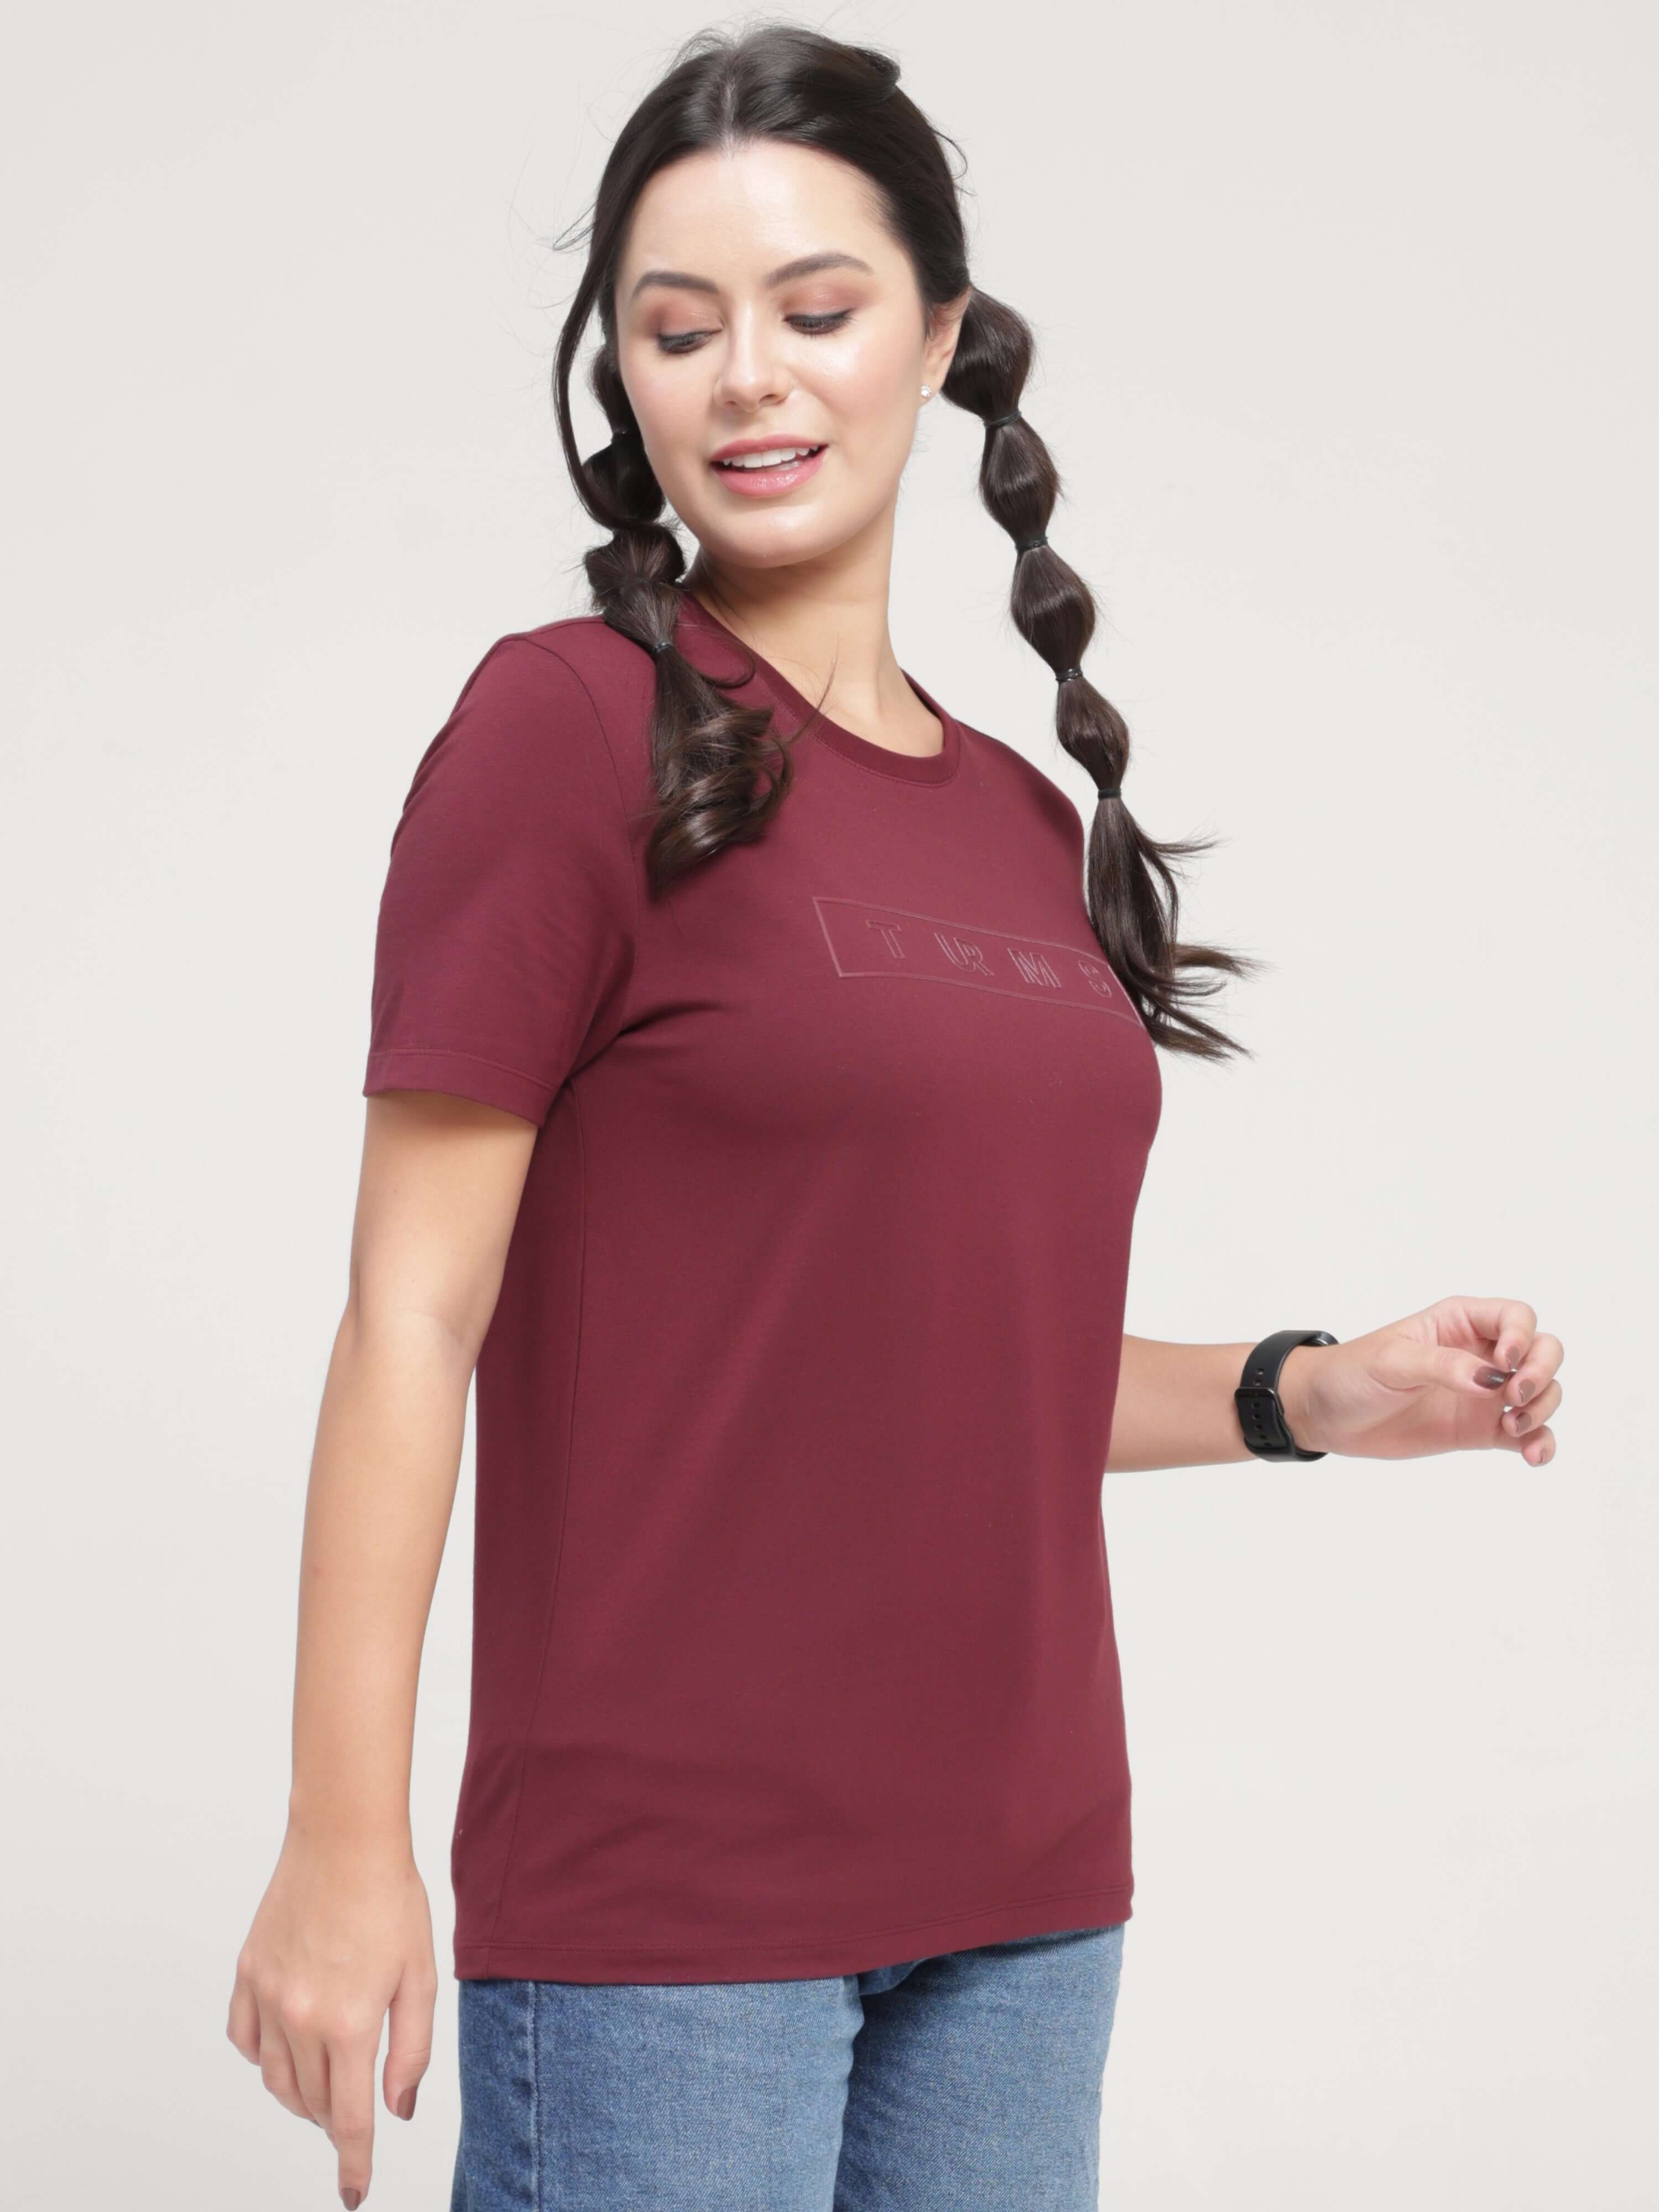 Woman wearing Burgundy Elite Turms T-shirt, anti stain, anti odour, tailored fit, stretchable fabric, round neckline, high-quality intelligent apparel.